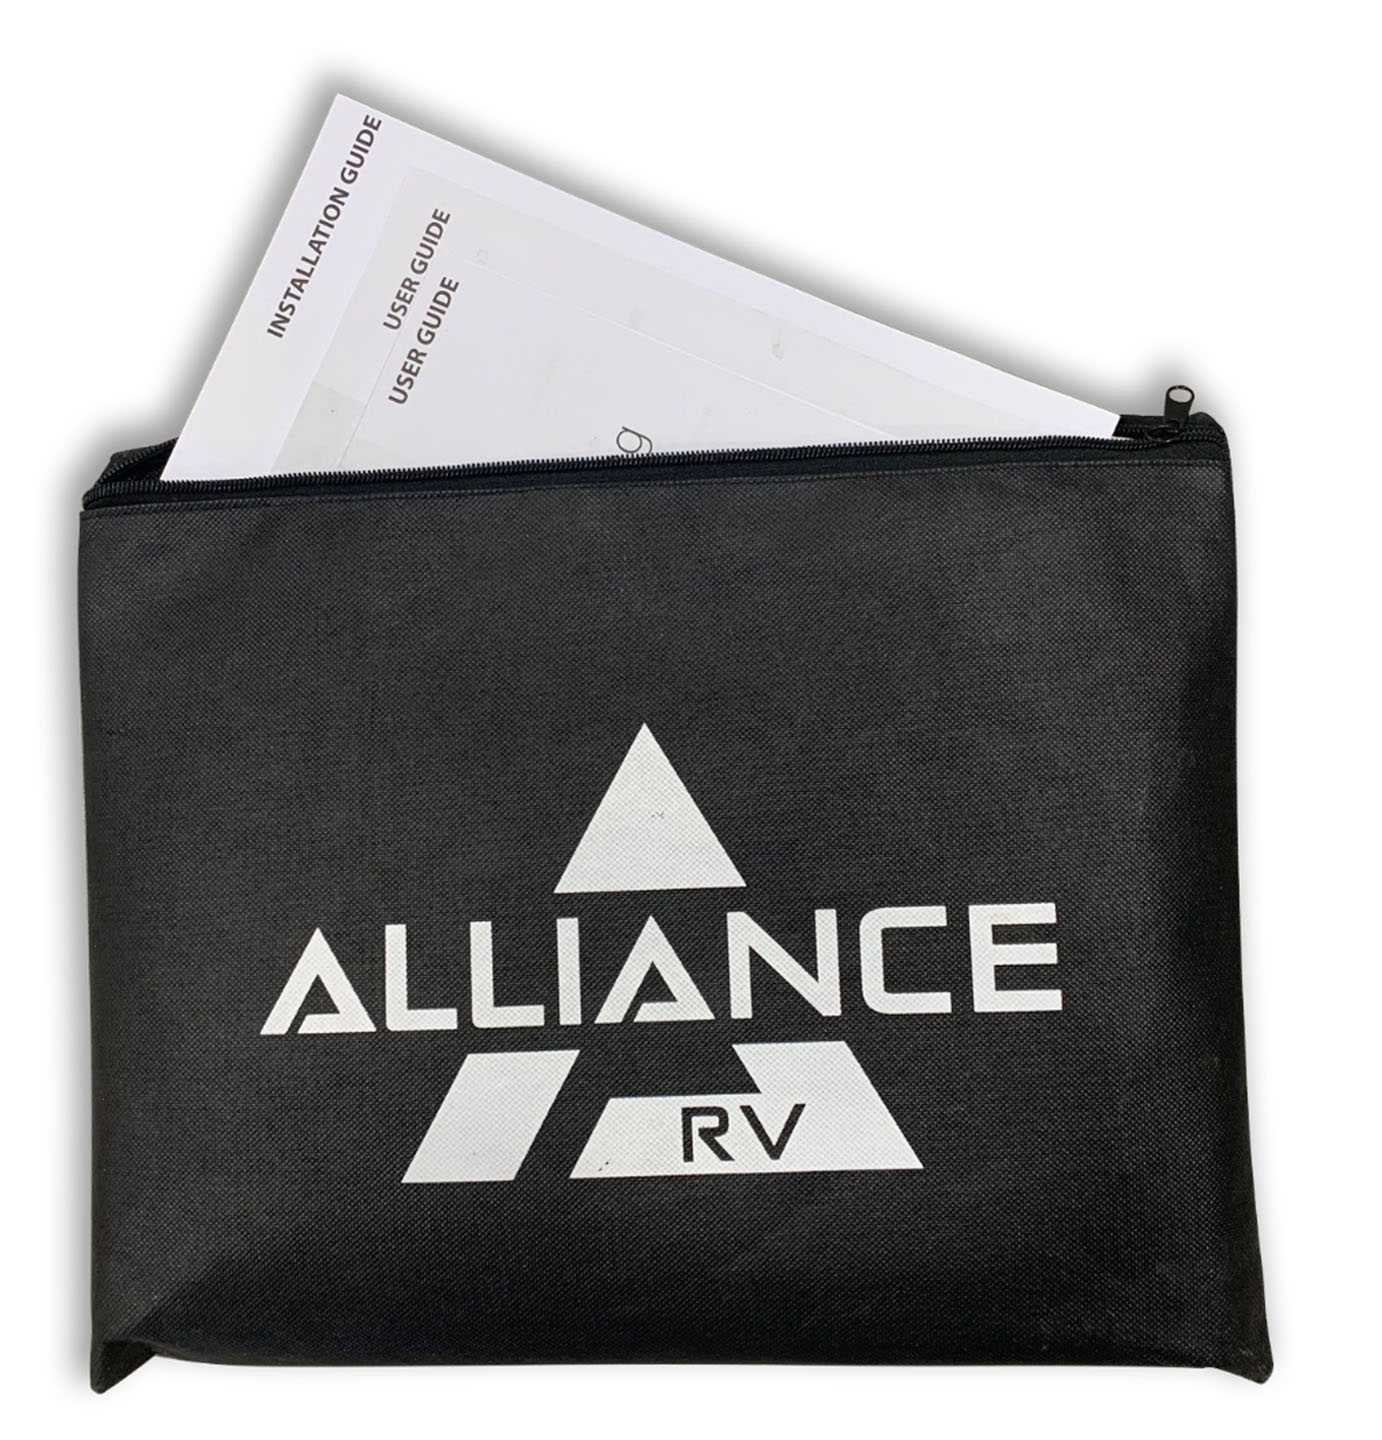 alliance RV paradigm 2021 Owners Information Bag User Manual 01